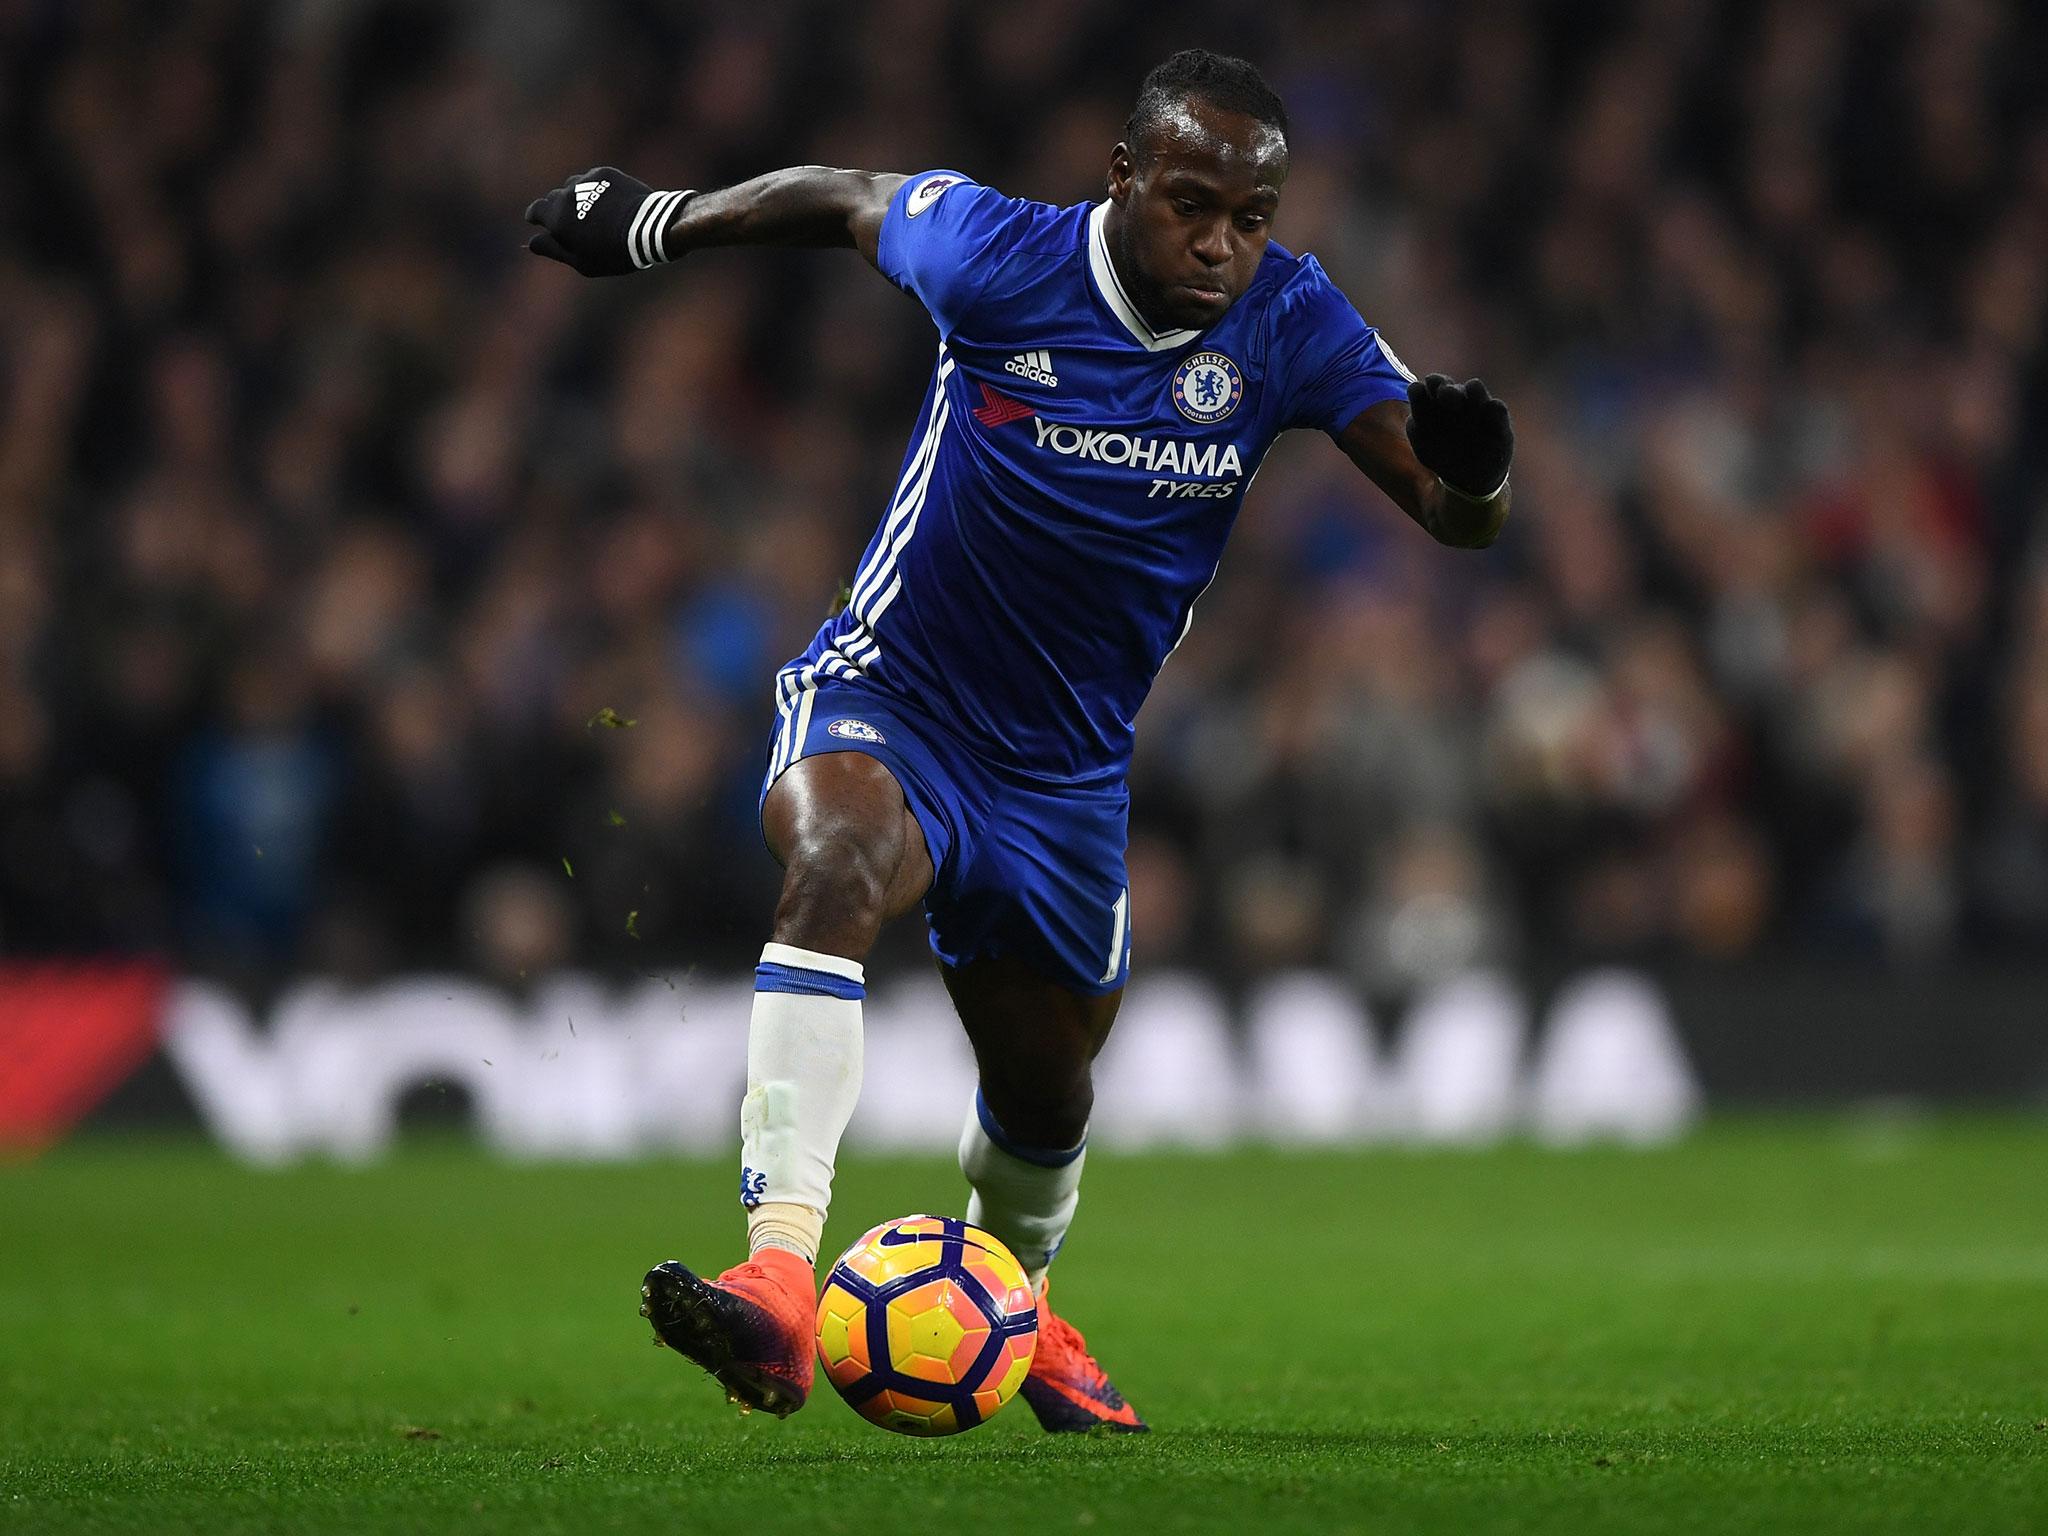 Victor Moses has flourished at Chelsea under Antonio Conte's new 3-4-3 system